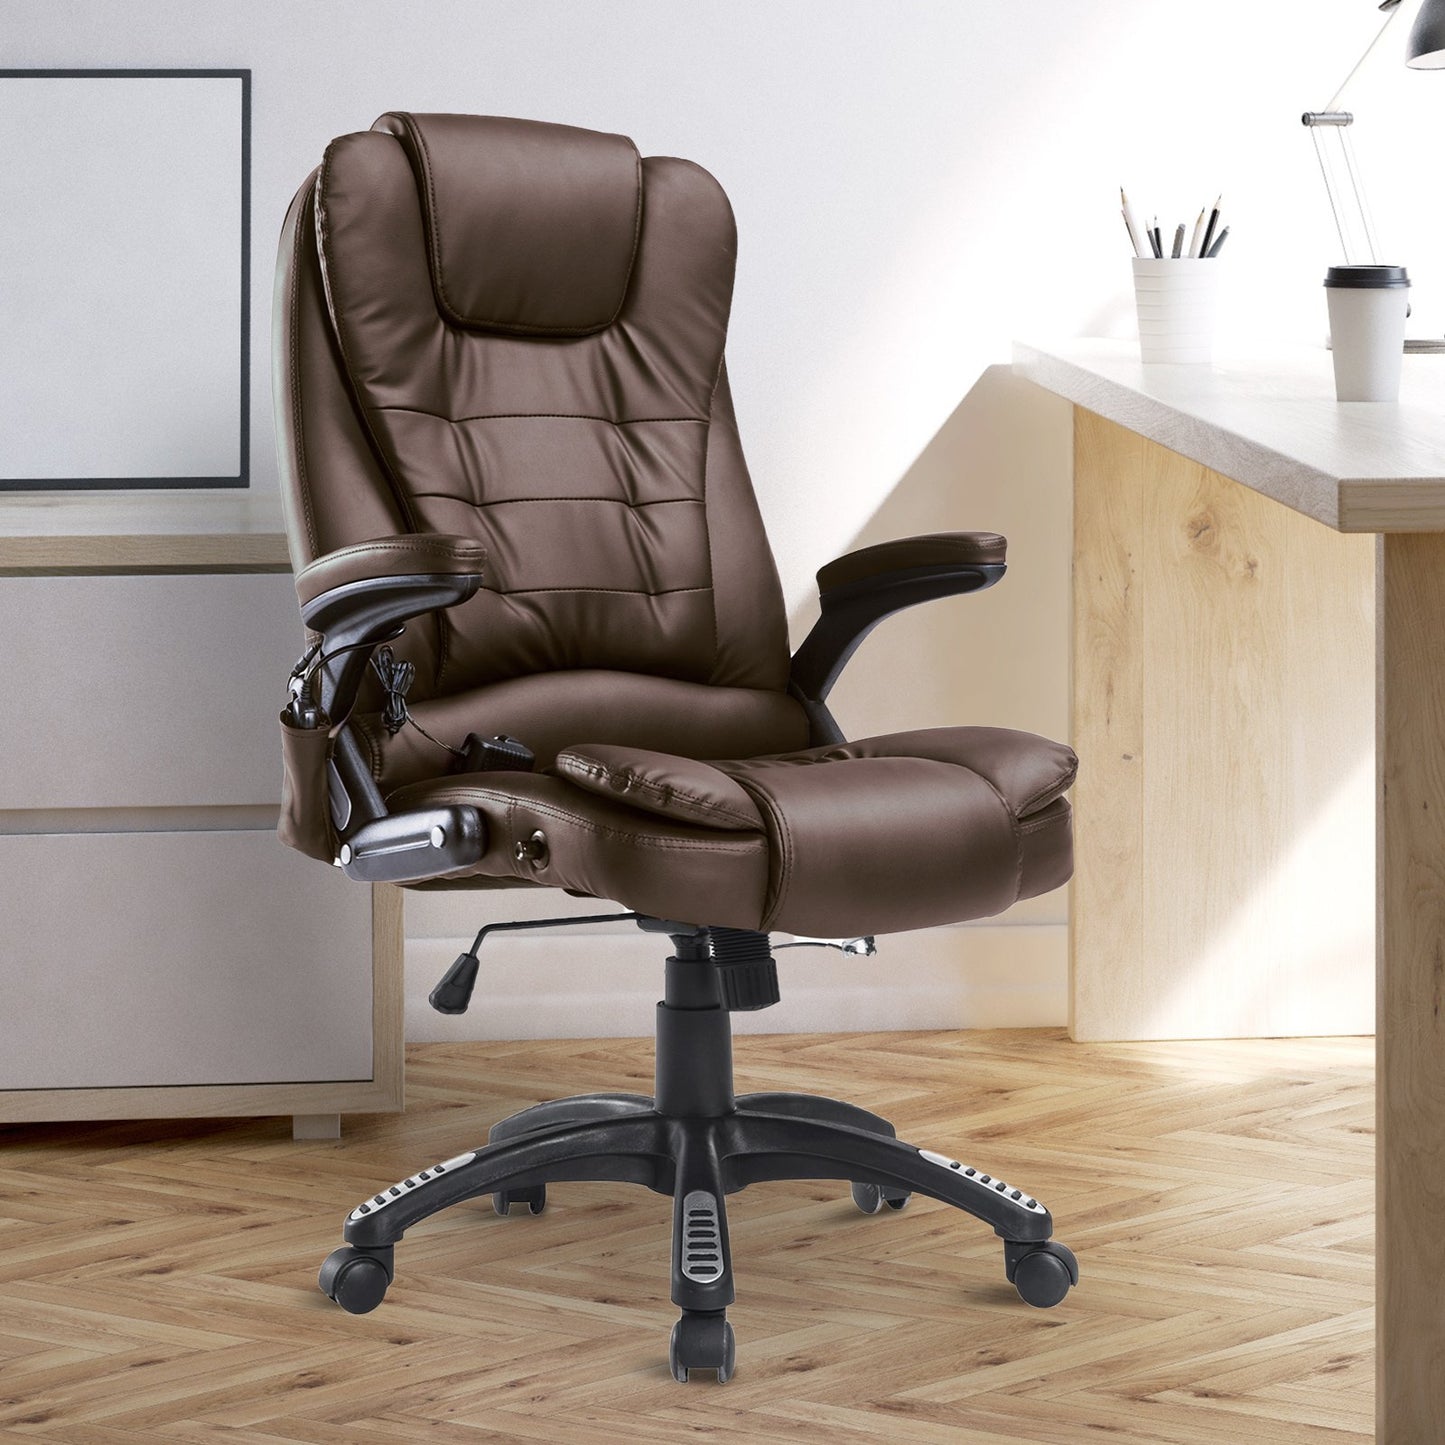 HOMCOM PU Leather Office Chair W/Massage Function, High Back-Brown